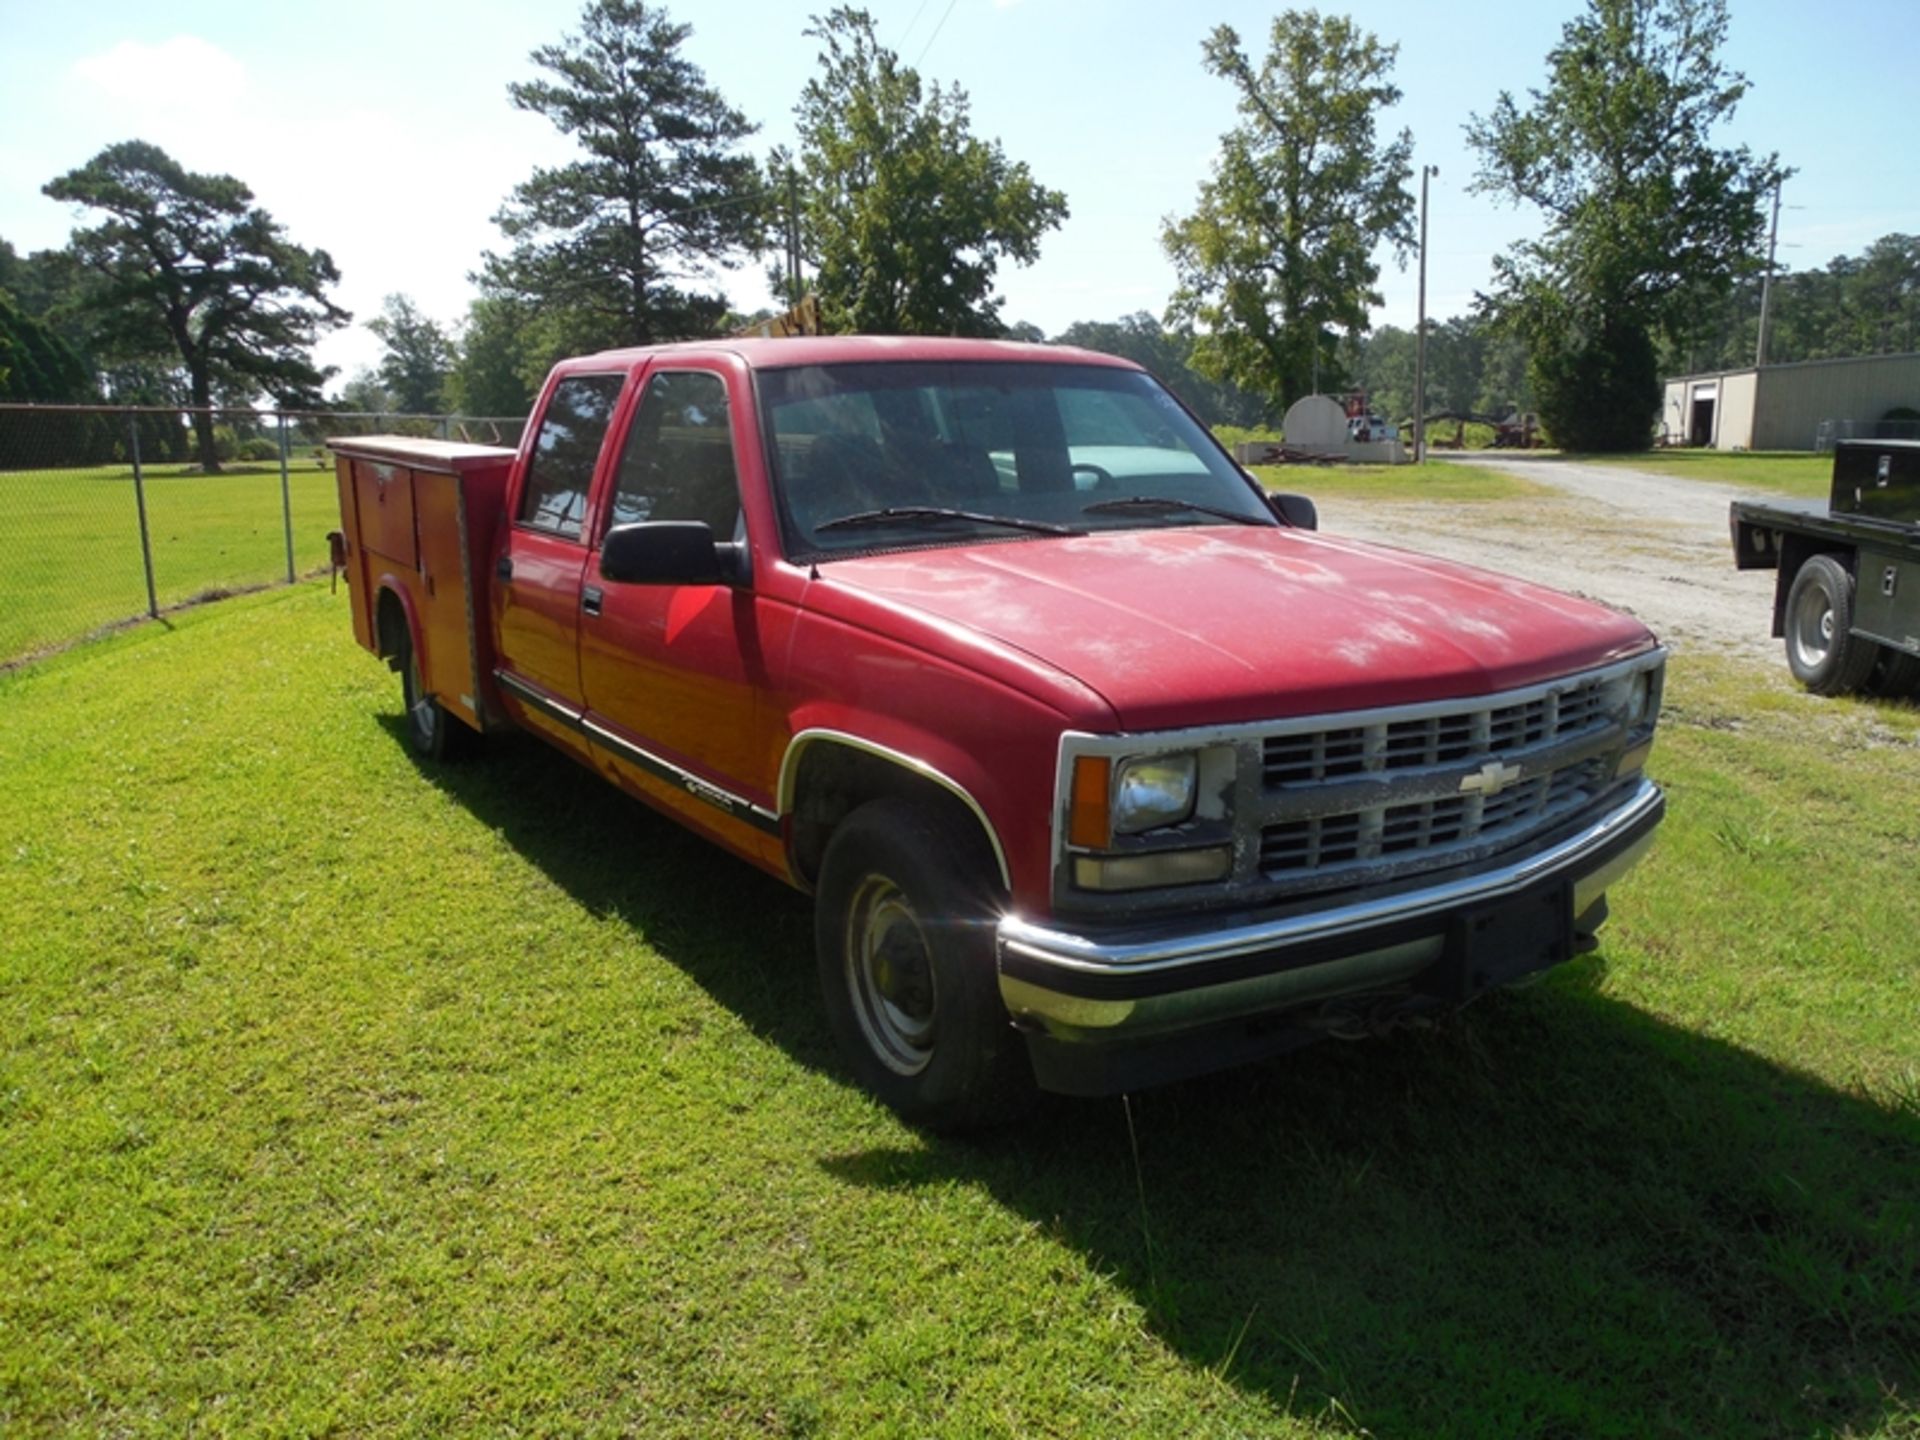 1997 Chev Crew Cab 3500 4 dr, Simpson 8' utility body, gas, manual, not running229,700 miles vin# - Image 2 of 8